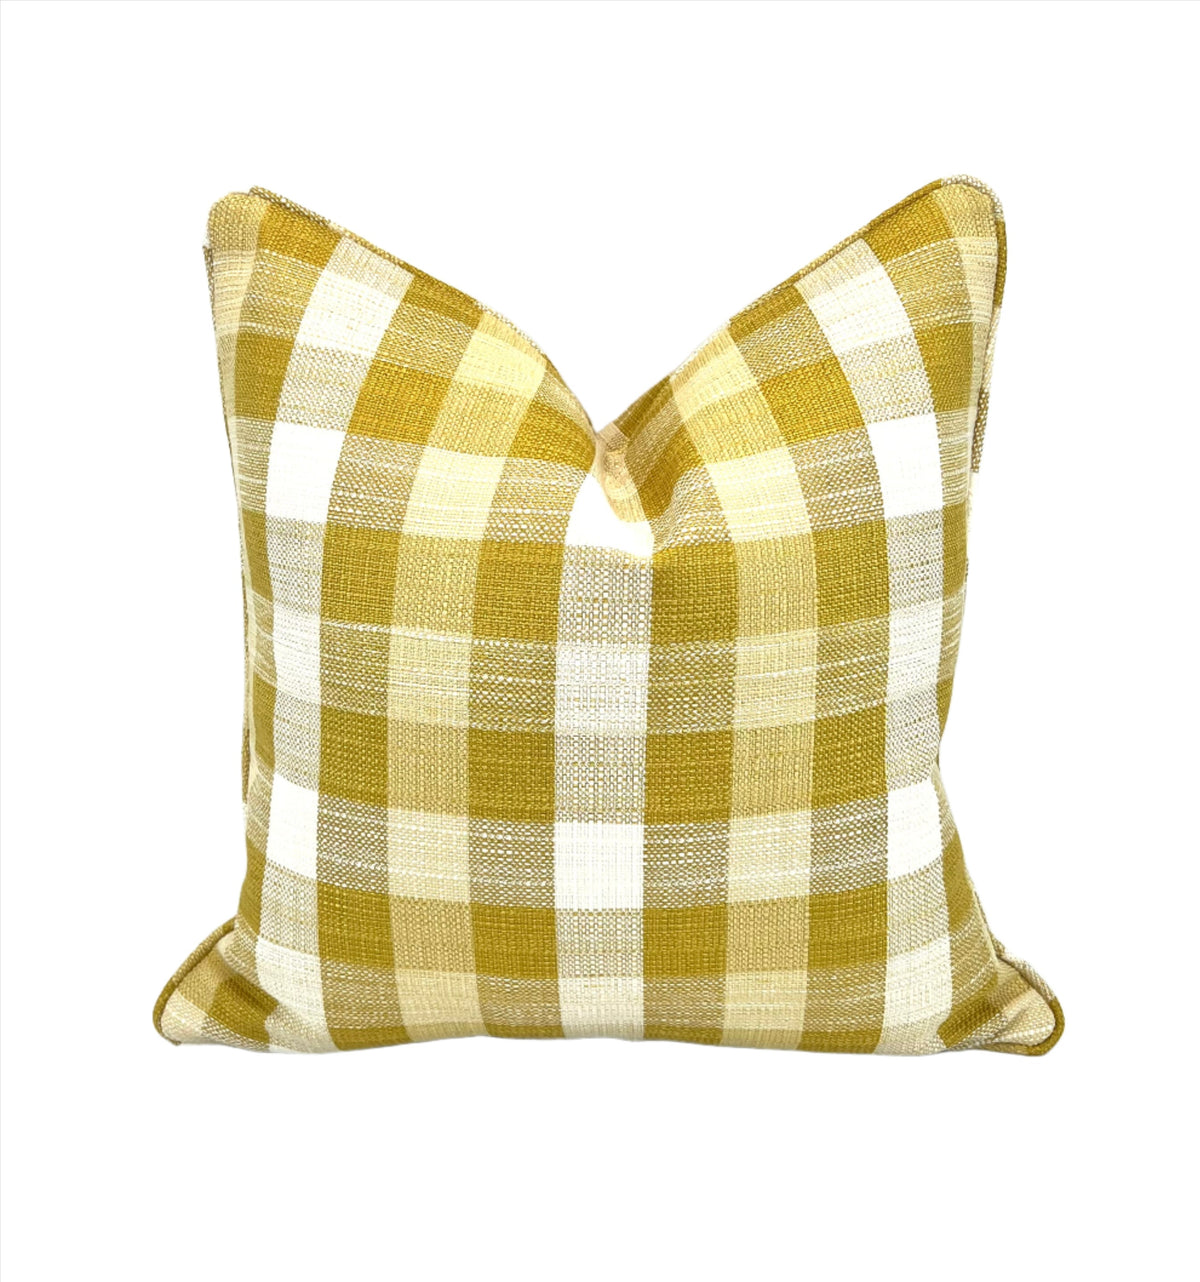 Citrus Buffalo Check Plaid Decorative Pillow Cover (Inserts Now Available!)